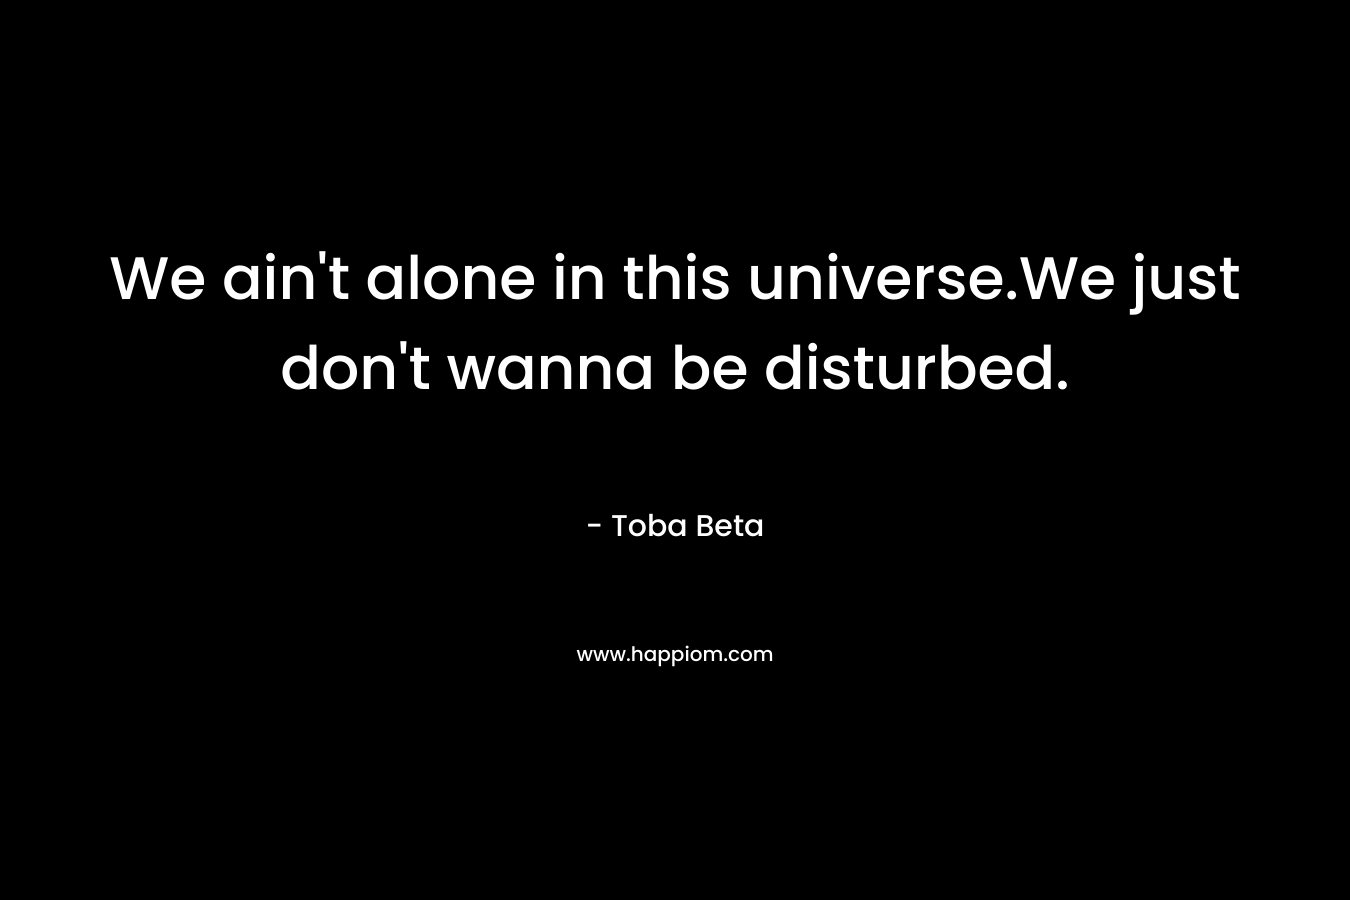 We ain't alone in this universe.We just don't wanna be disturbed.